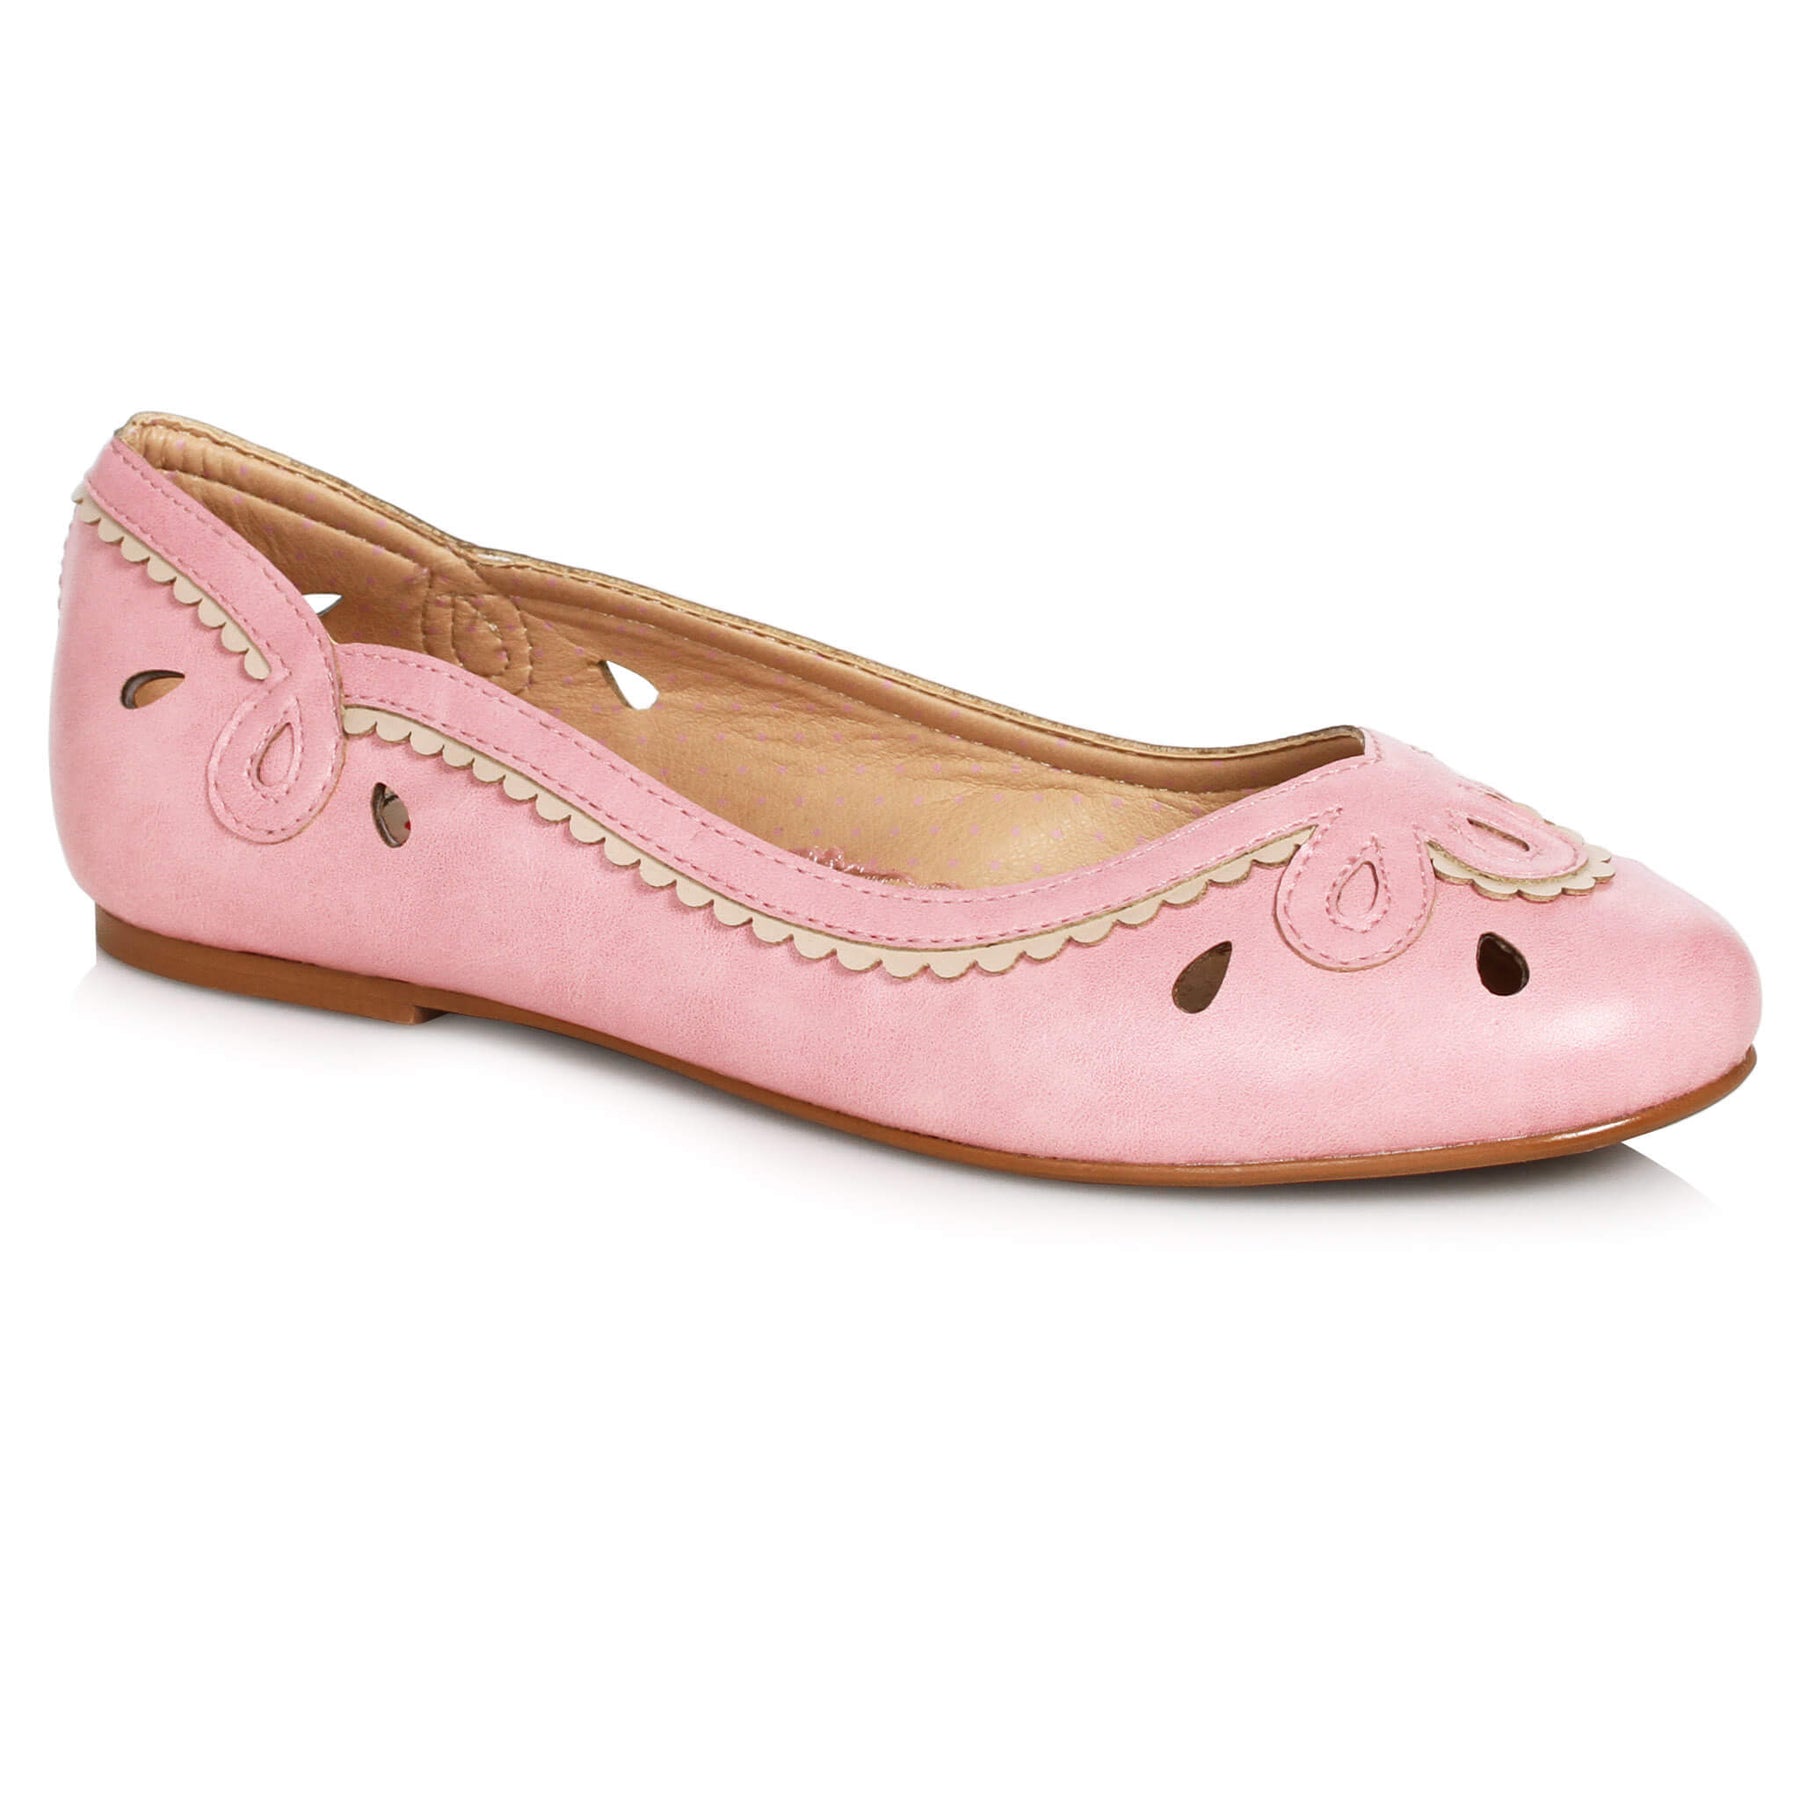 Bettie Page Shoes Dolly Flats - Pink – Atomic Cherry